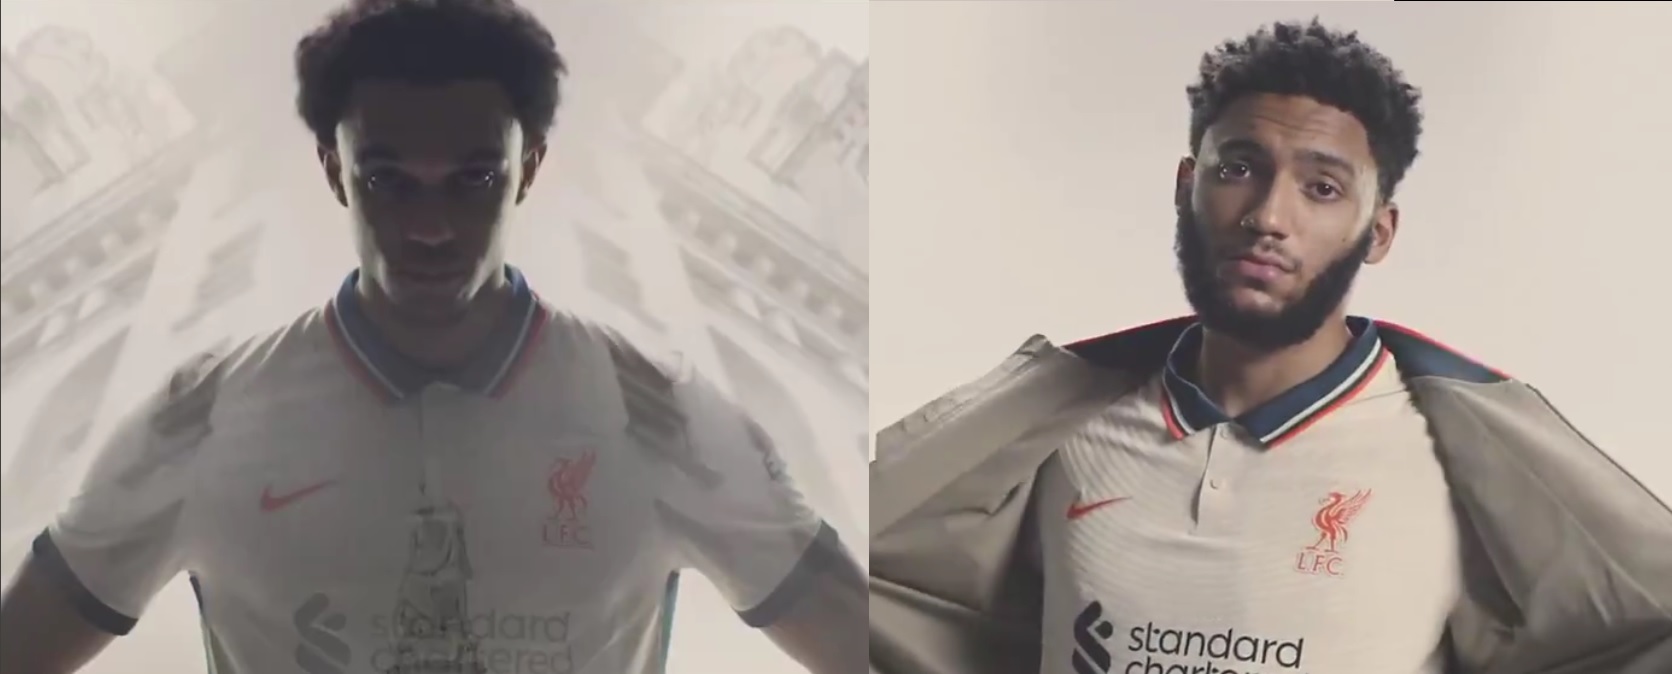 (Video) Liverpool release gorgeous new away kit – an instant classic for Reds fans